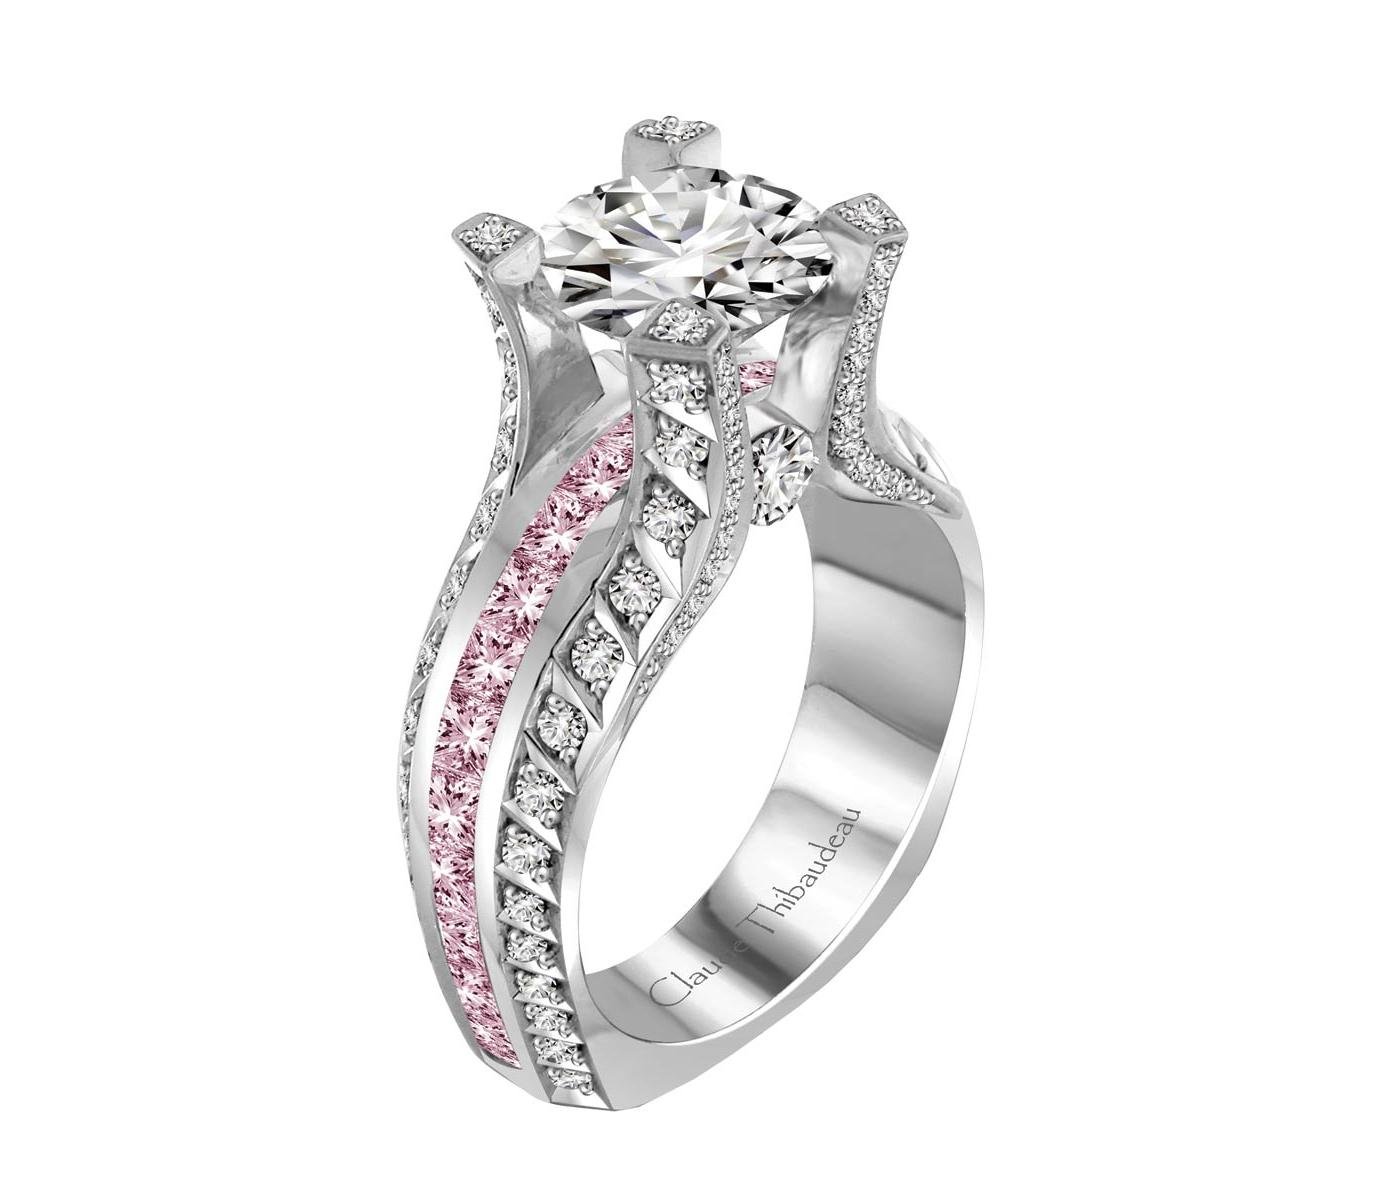 Ring by Claude Thibaudeau